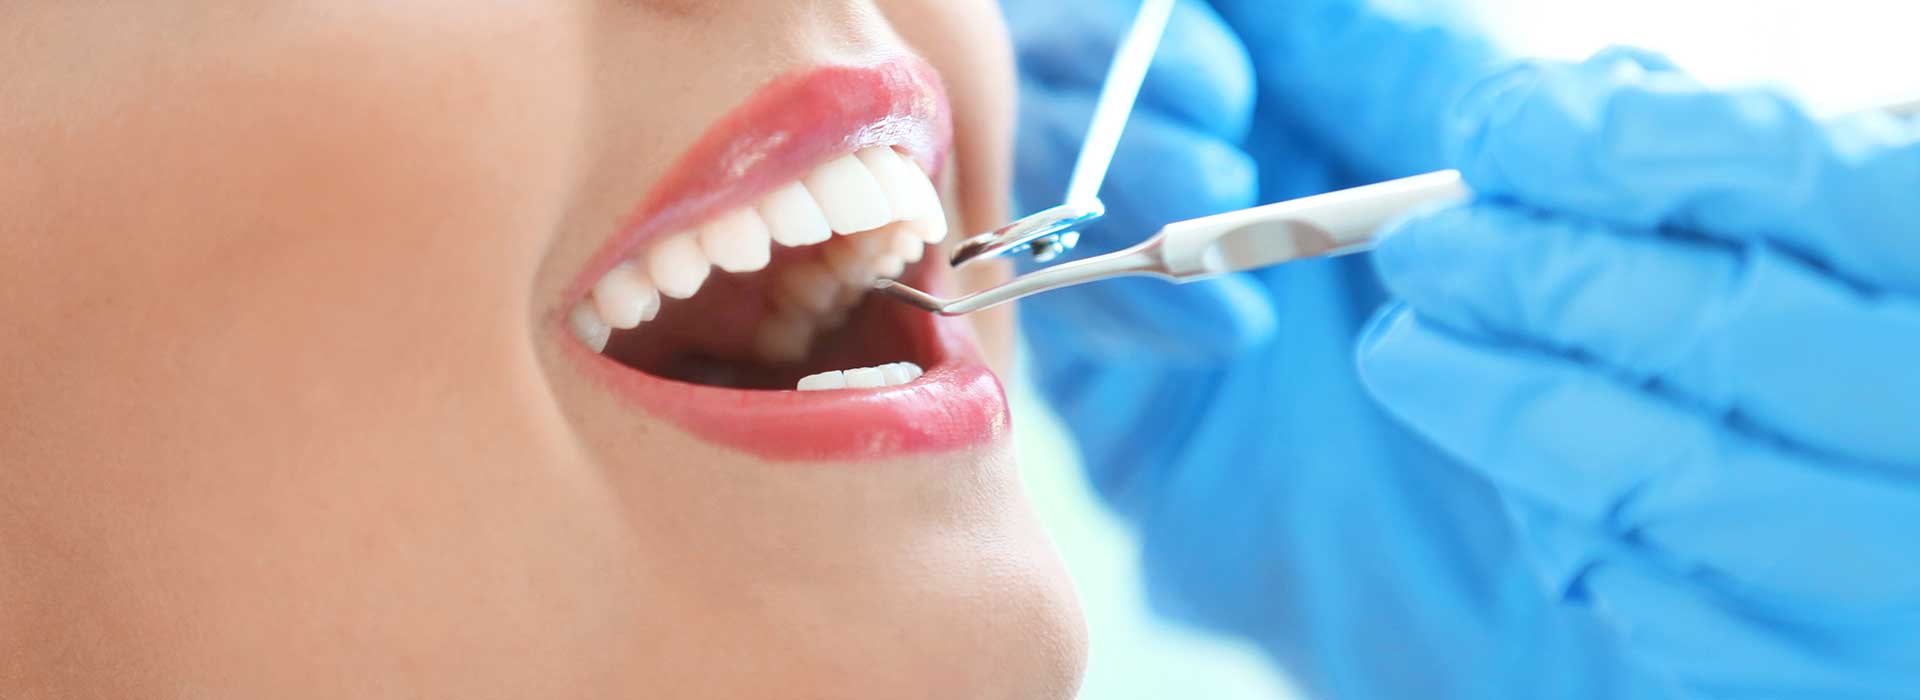 A woman getting filling treatment at the dentist